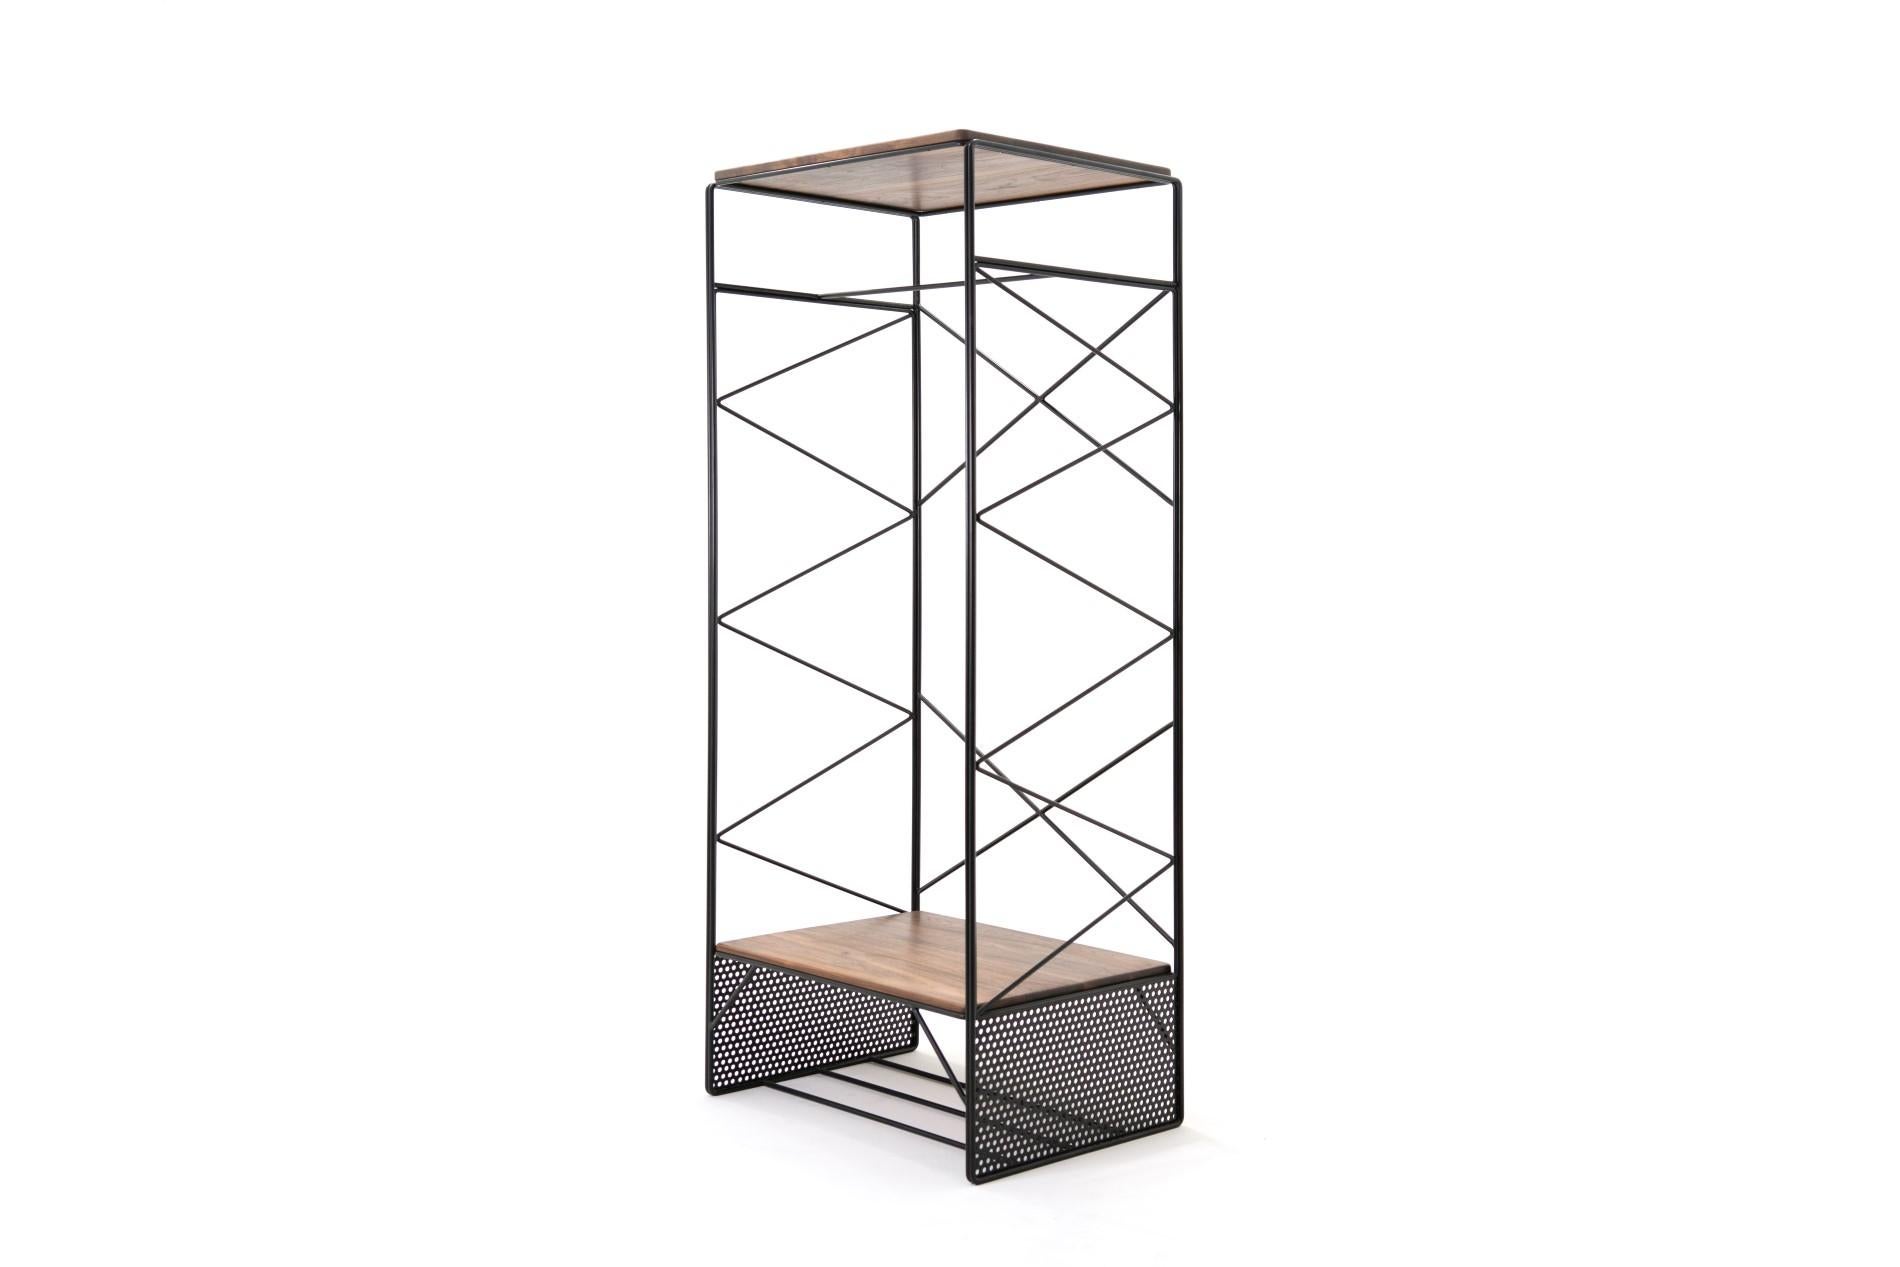 The temple of dream is a freestanding open storage unit with a hanging solution and two shelves. This piece is handmade in solid wood and steel. It is an ideal hallway, bedroom, or kitchen storage solution. 
In a post-industrial era, this unit fits